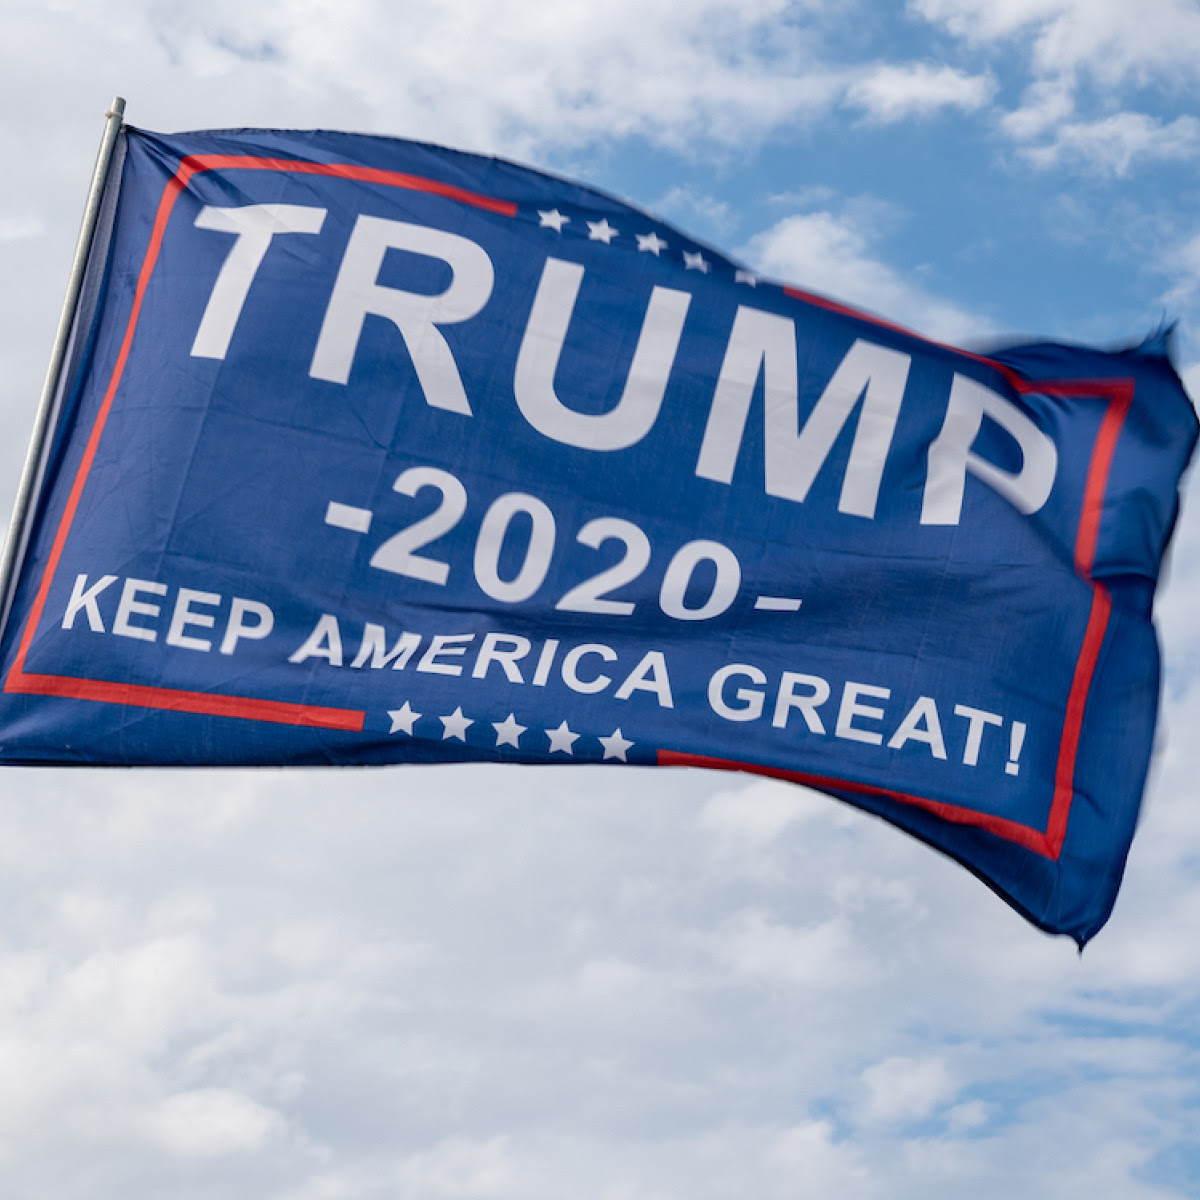 2020 Lingers Only for Those Out of Touch With Voters' March Forward